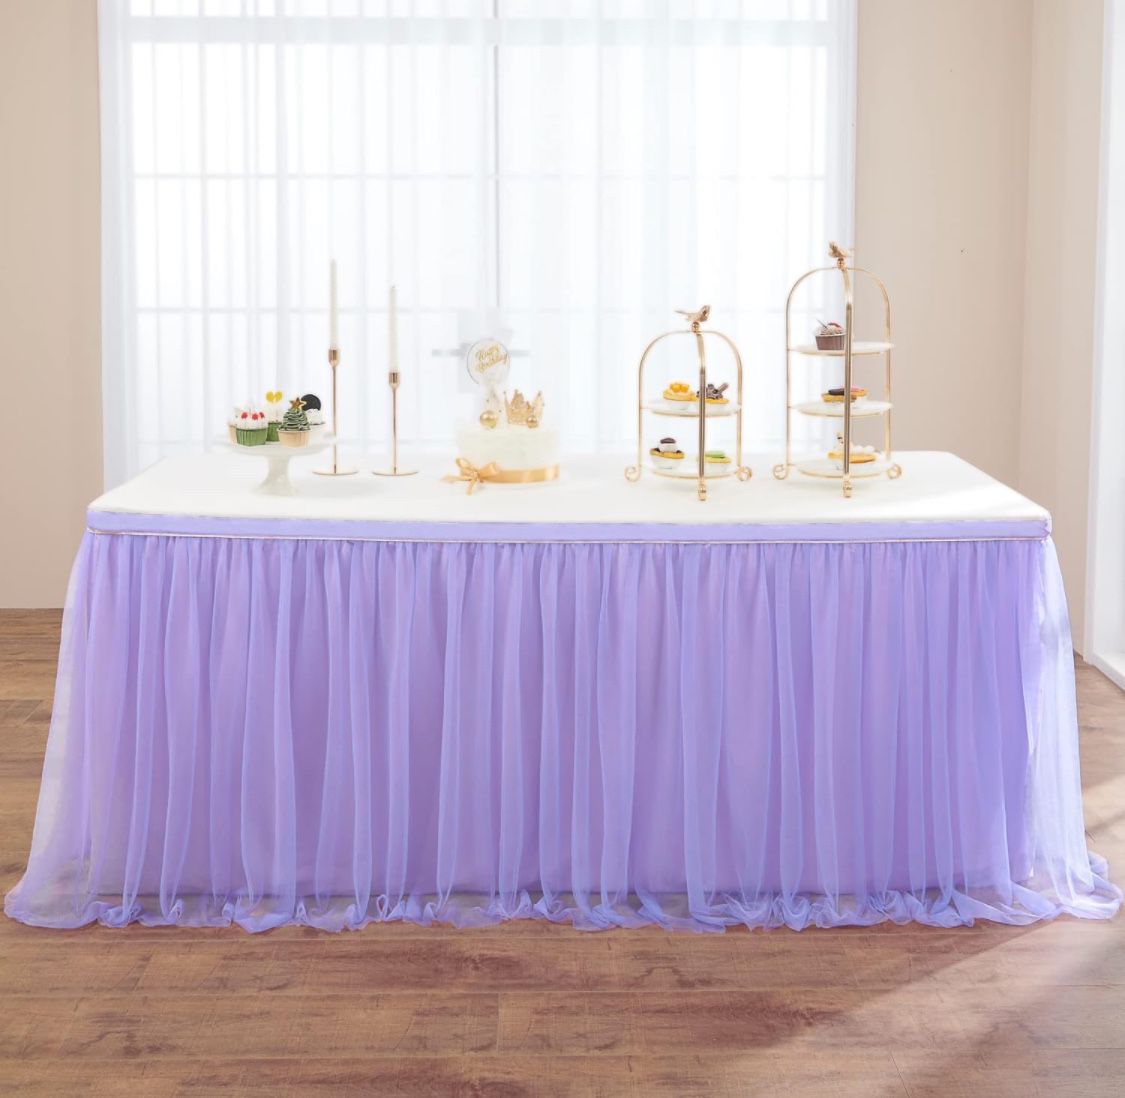 Lavender Tulle Table Skirts for 6ft Rectangle or Round Tables, Baby Purple Tutu Table Skirt Cloth Birthday Party Cake Table Mermaid Decorations(L167in